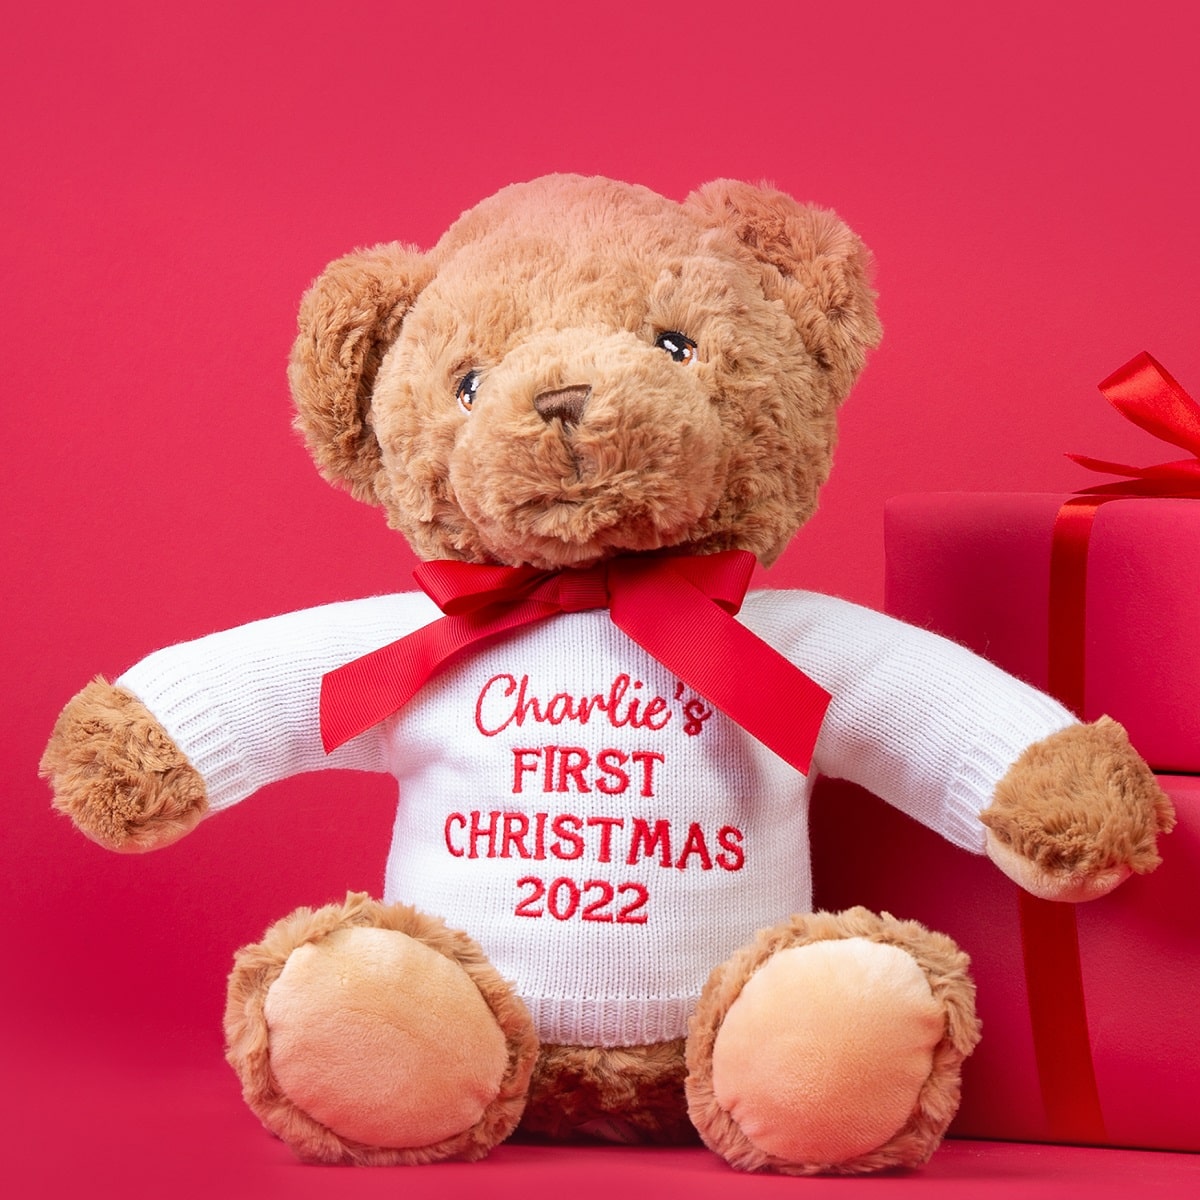 charlies first christmas 2022 personalised teddy bear with red bow